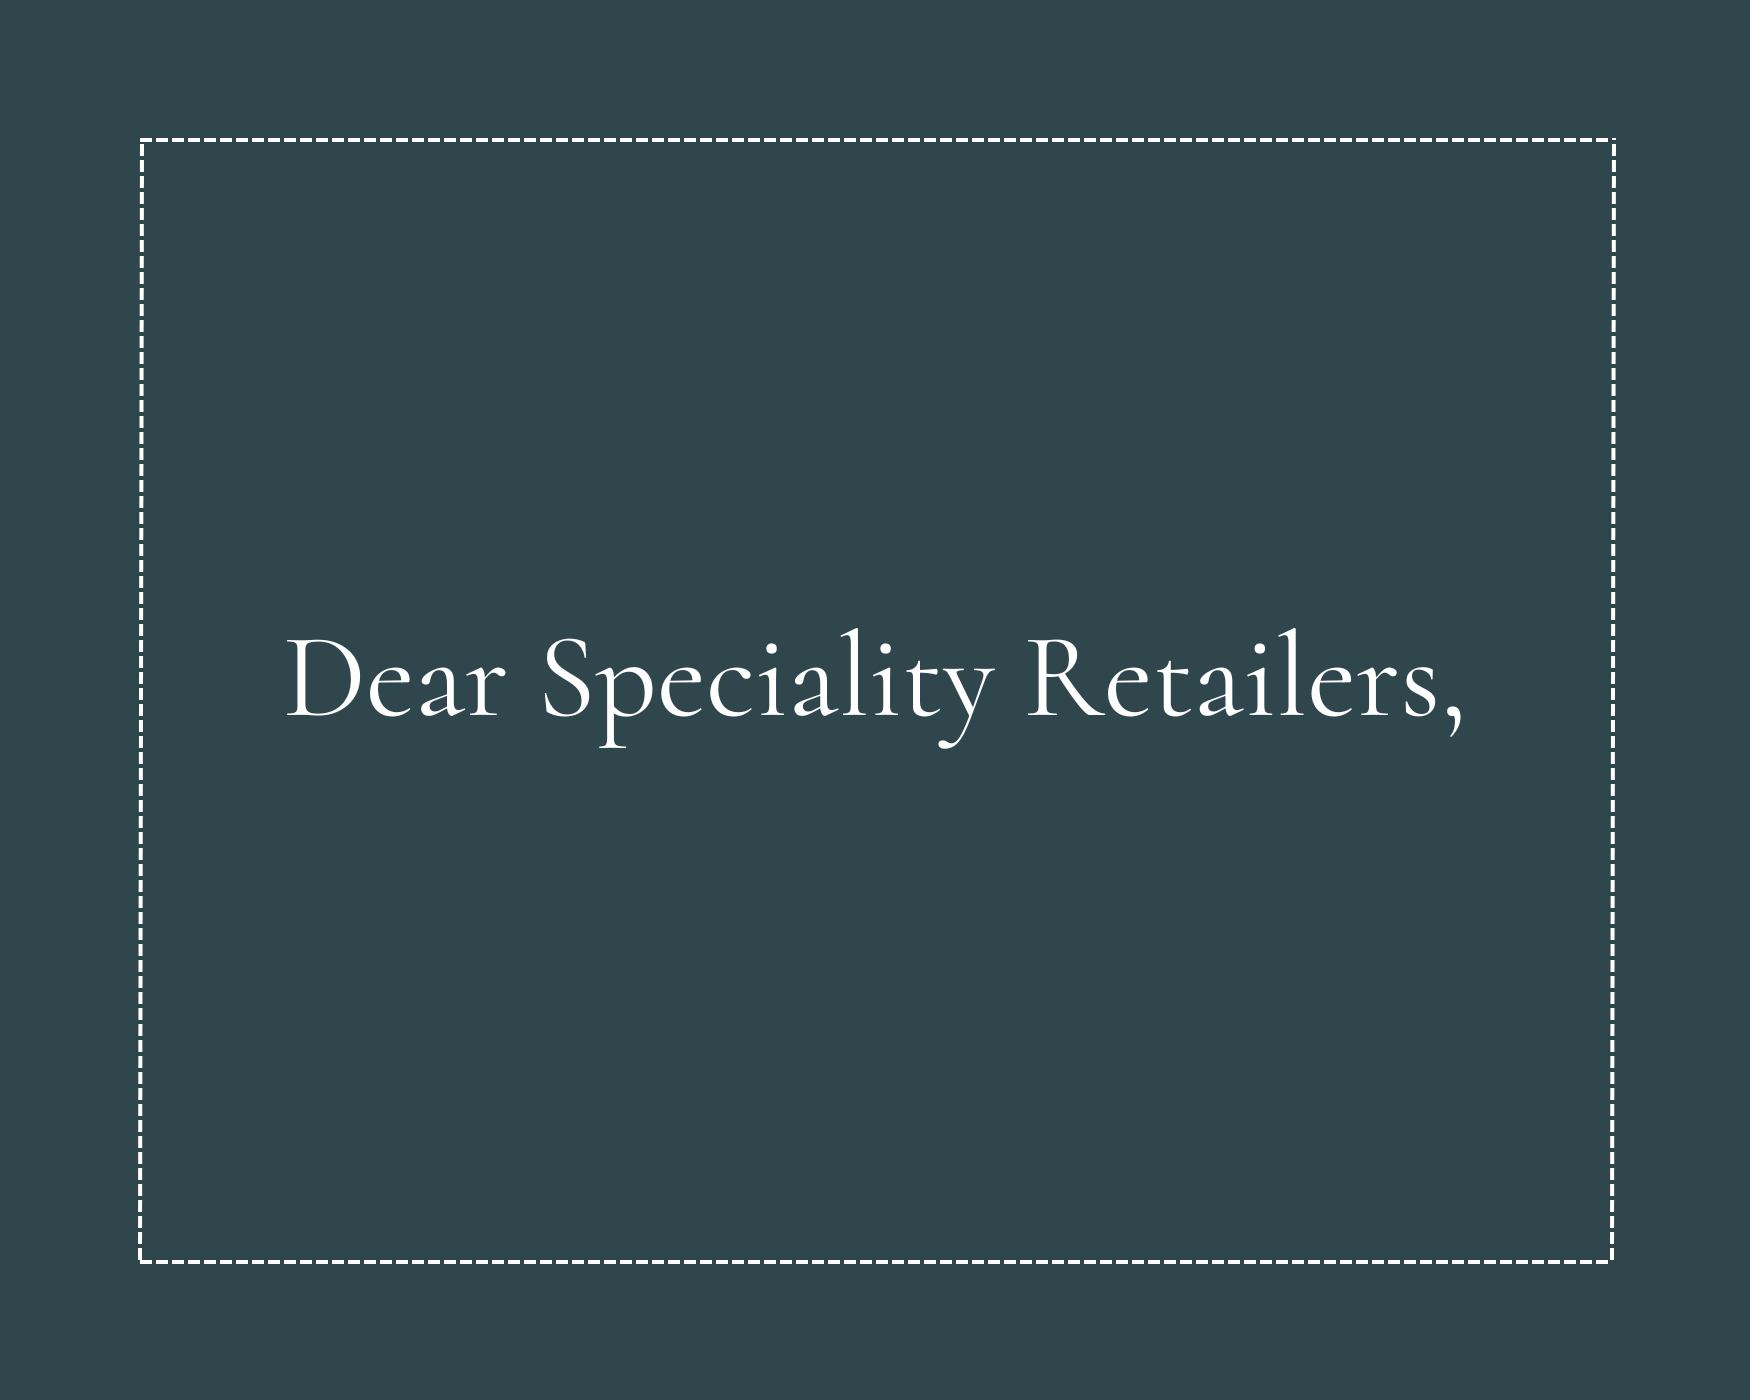 speciality retail, shop, gift, home goods, letter to shops, manufacturer, 